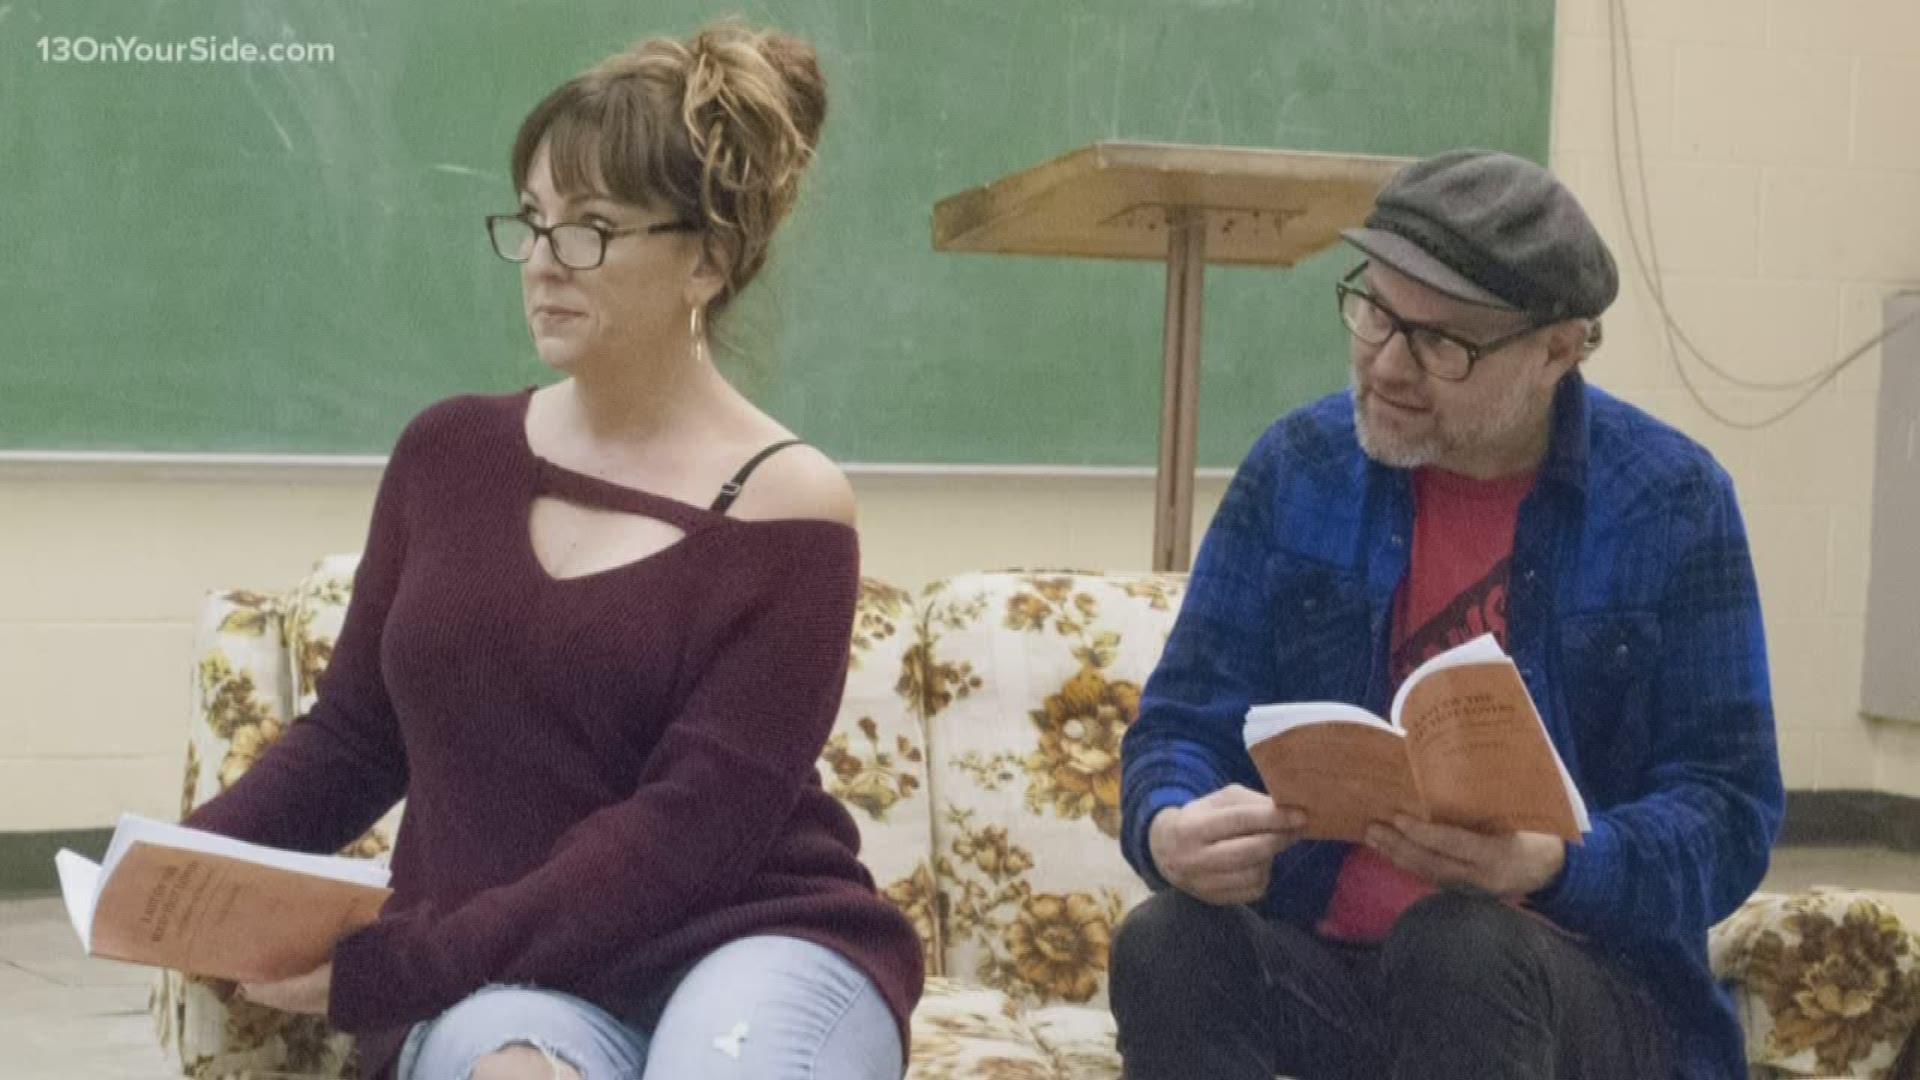 Jewish Theatre Grand Rapids will perform "Last of the Red Hot Lovers," a comedy by Neil Simon.